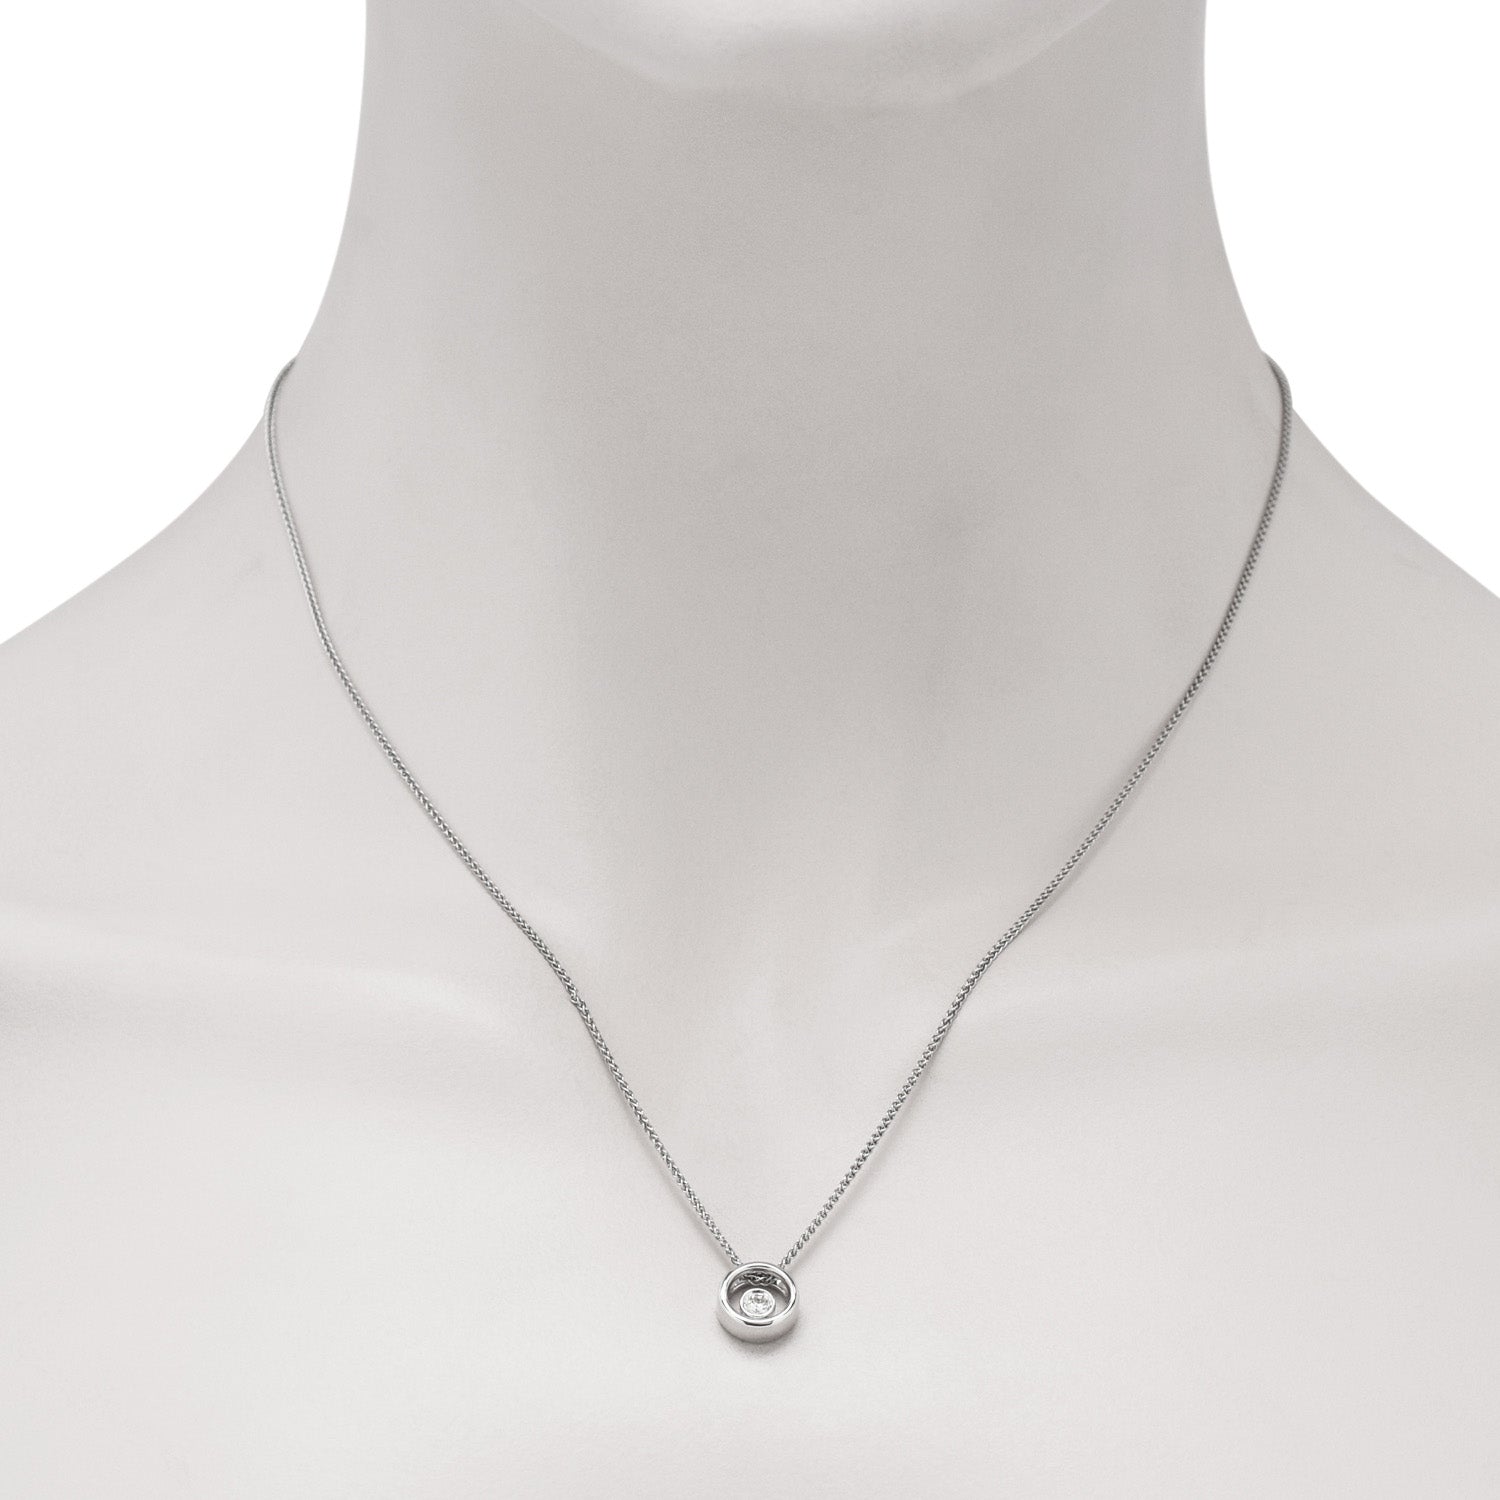 Northern Star Diamond Celestial Collection Necklace in Sterling Silver (1/10ct)